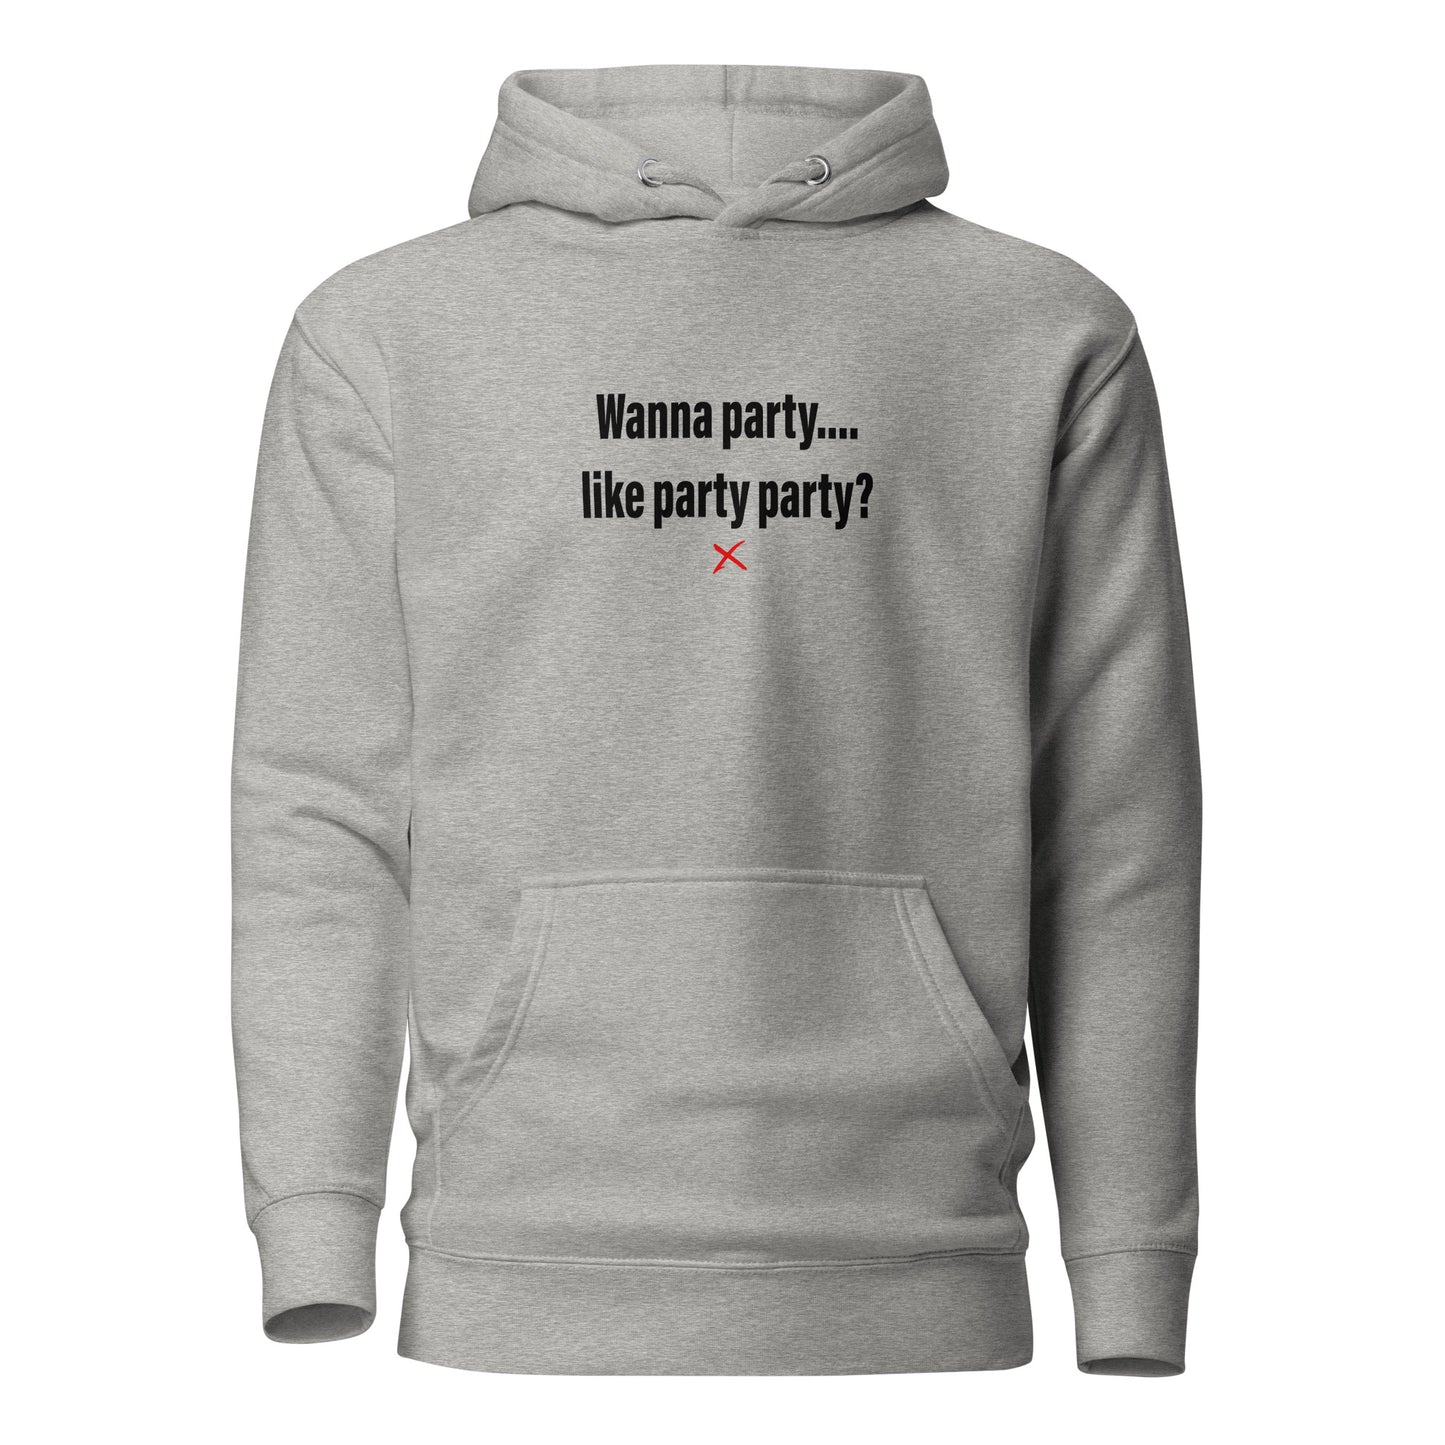 Wanna party.... like party party? - Hoodie